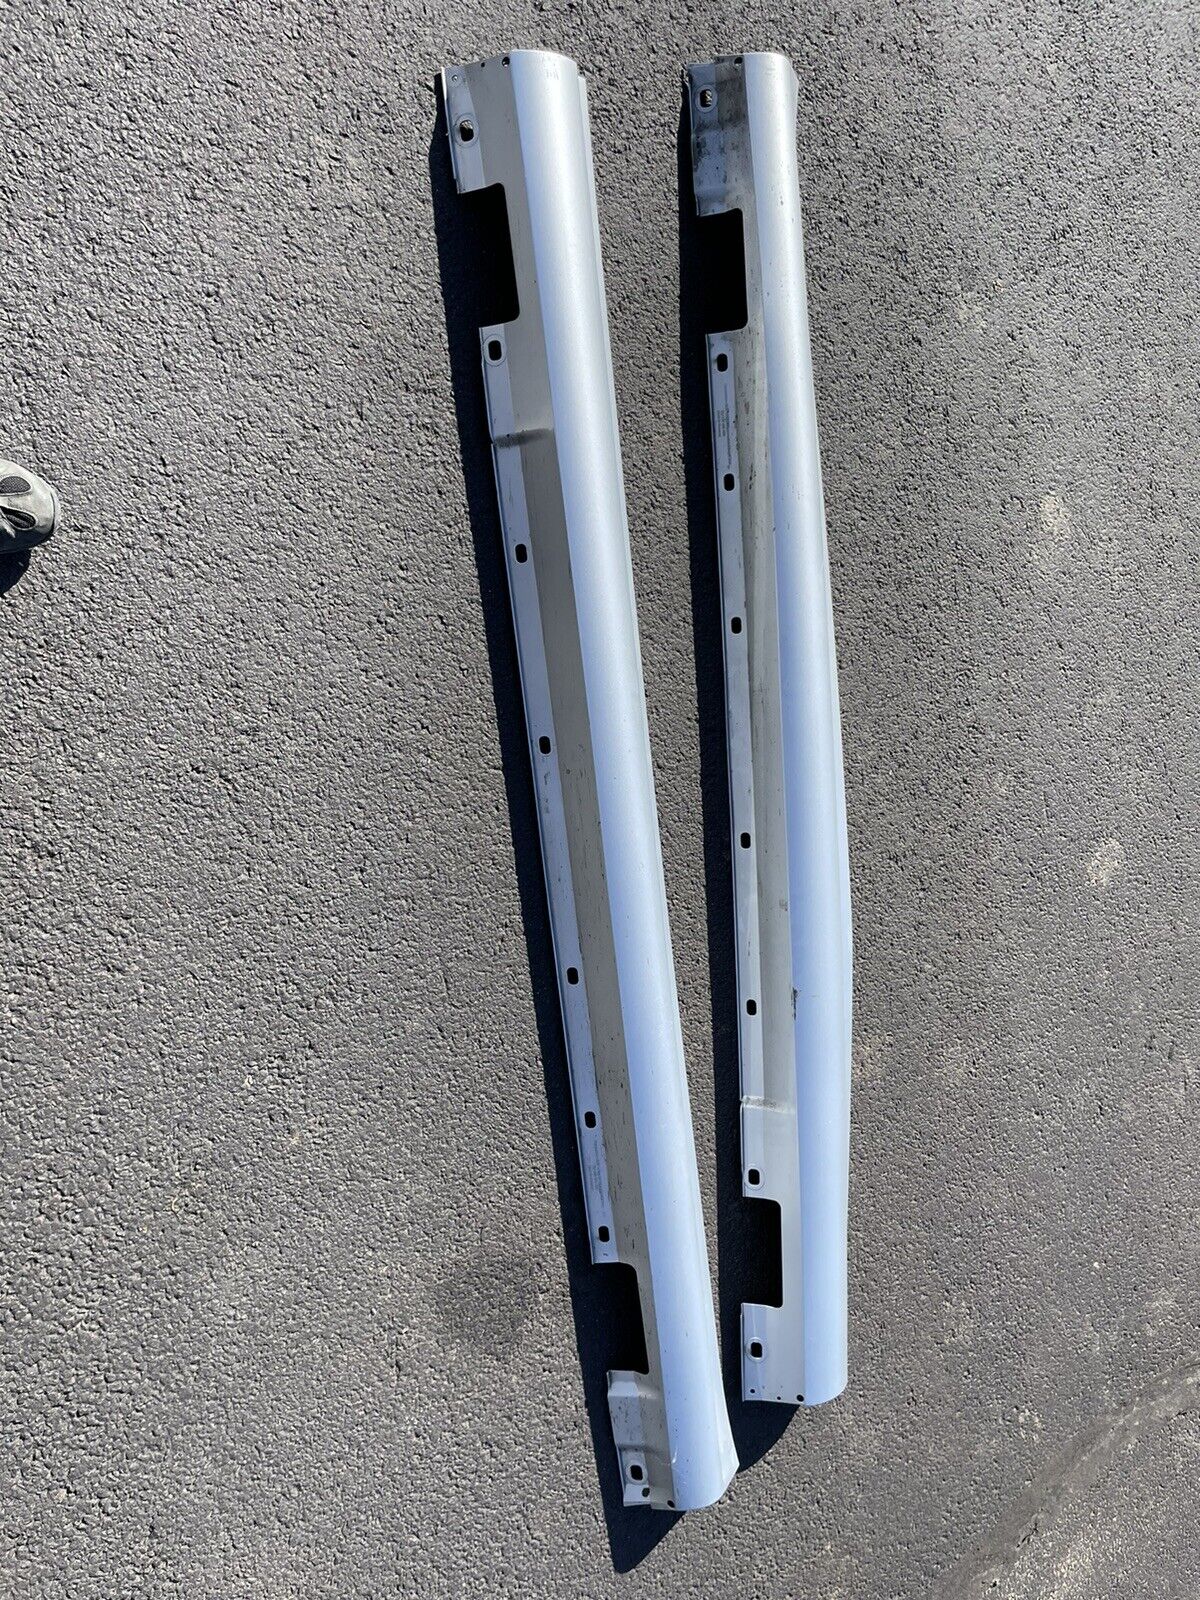 2010 Mercedes AMG C63 Rocker Panels - Side Skirts. Left and Right.